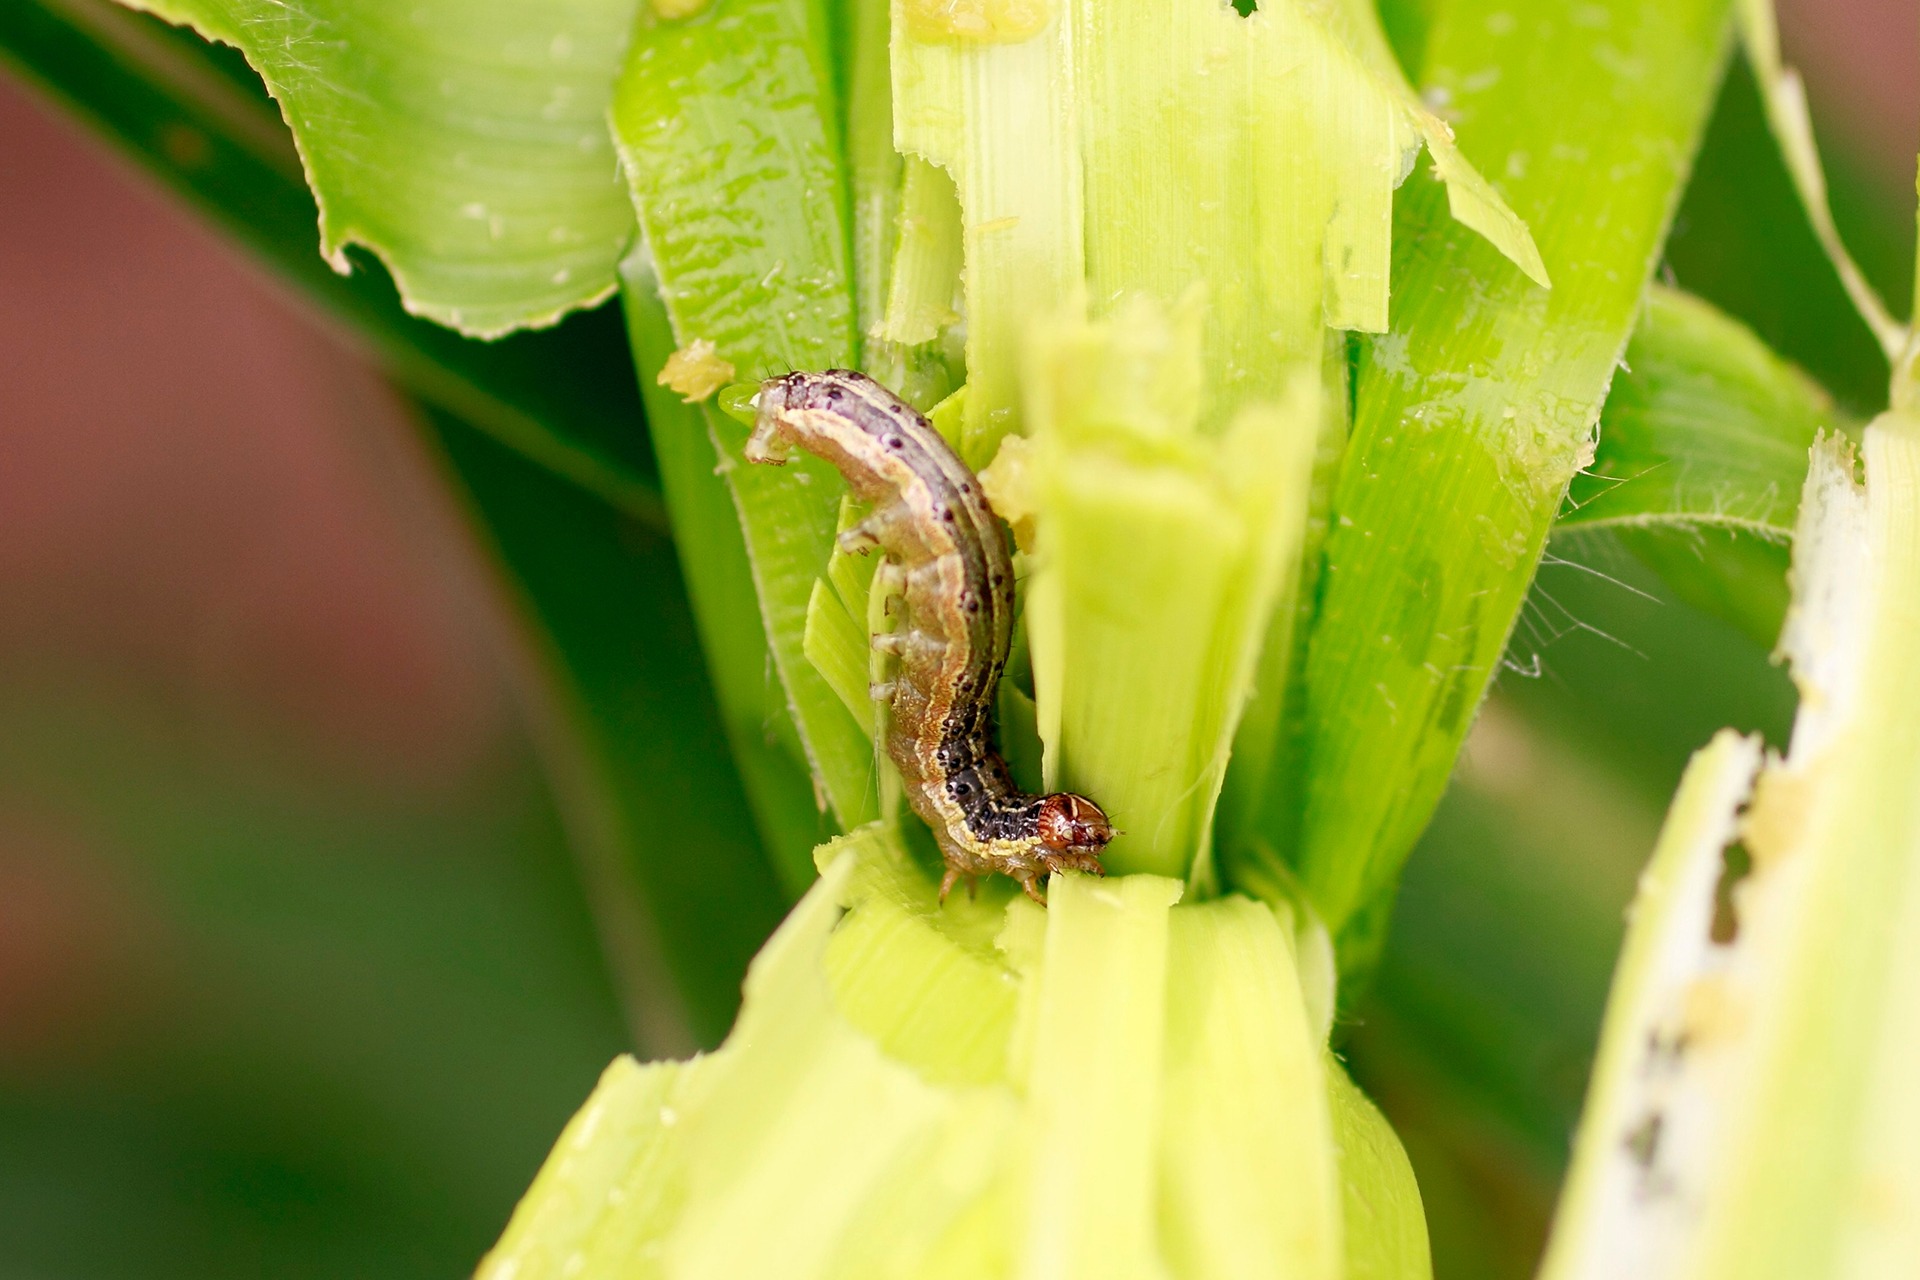 Fall Armyworm in Nepal: Techniques To Keep The Worm at Bay